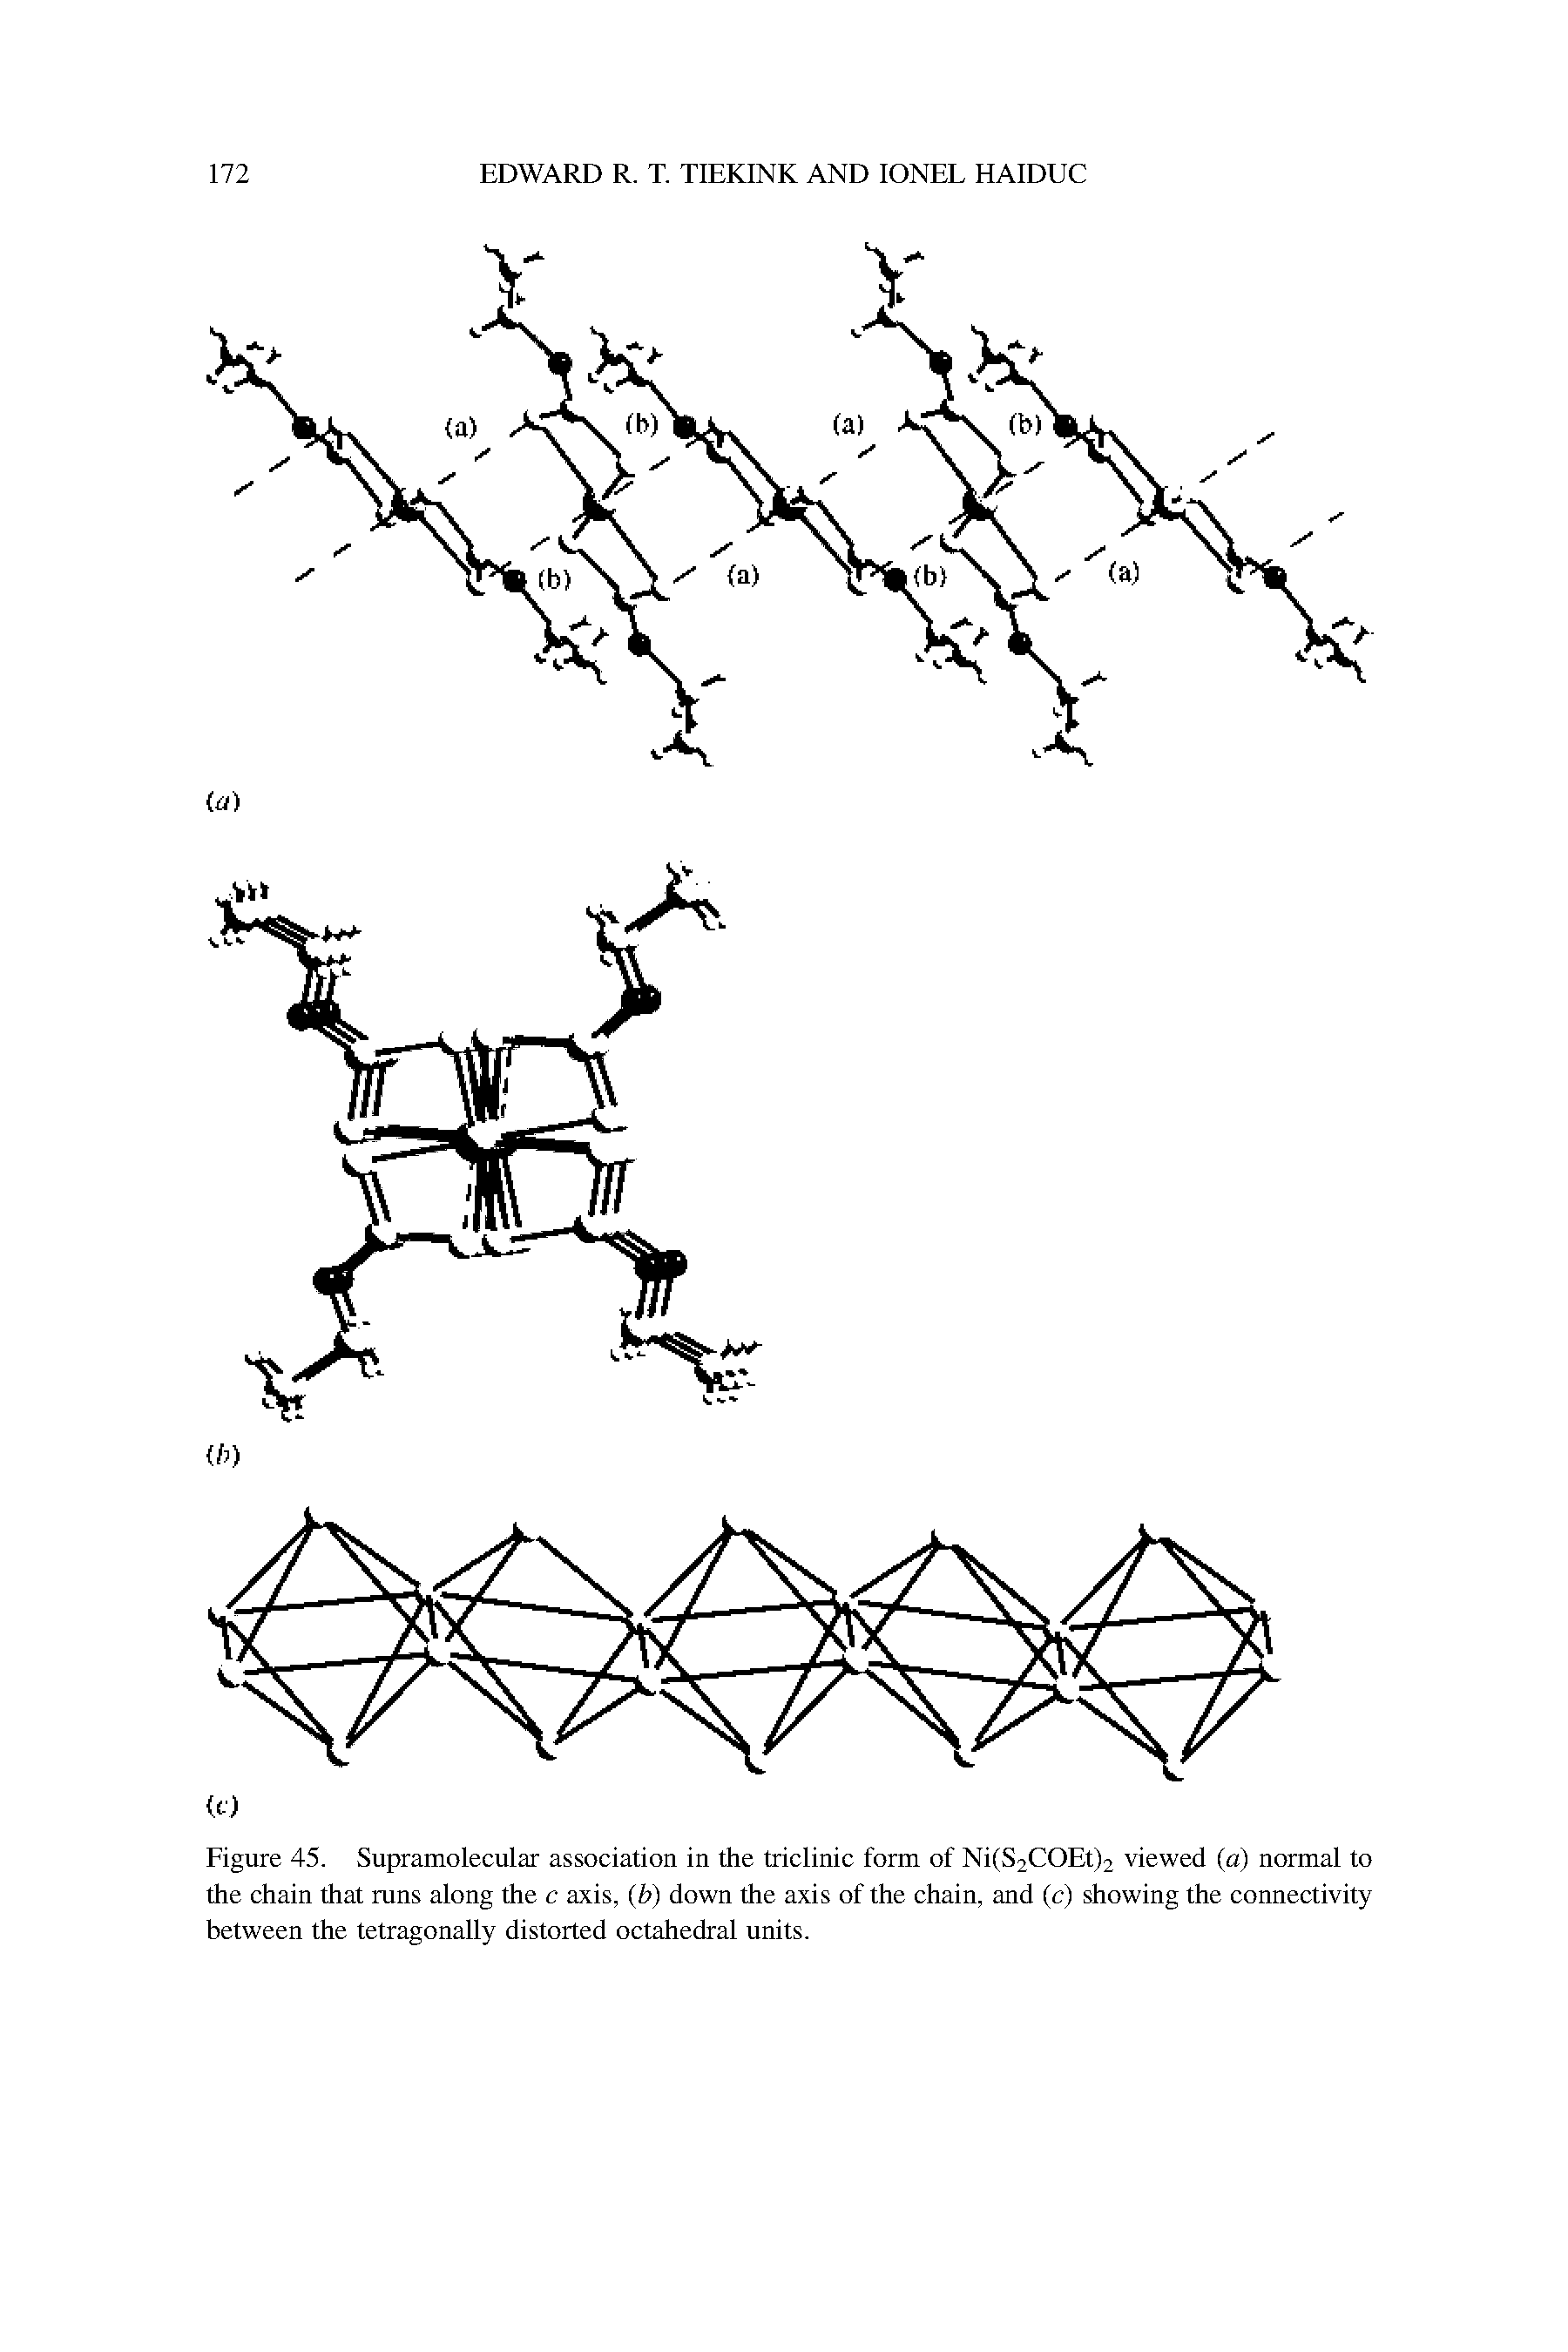 Figure 45. Supramolecular association in the triclinic form of Ni(S2COEt)2 viewed (a) normal to the chain that runs along the c axis, (b) down the axis of the chain, and (c) showing the connectivity between the tetragonally distorted octahedral units.